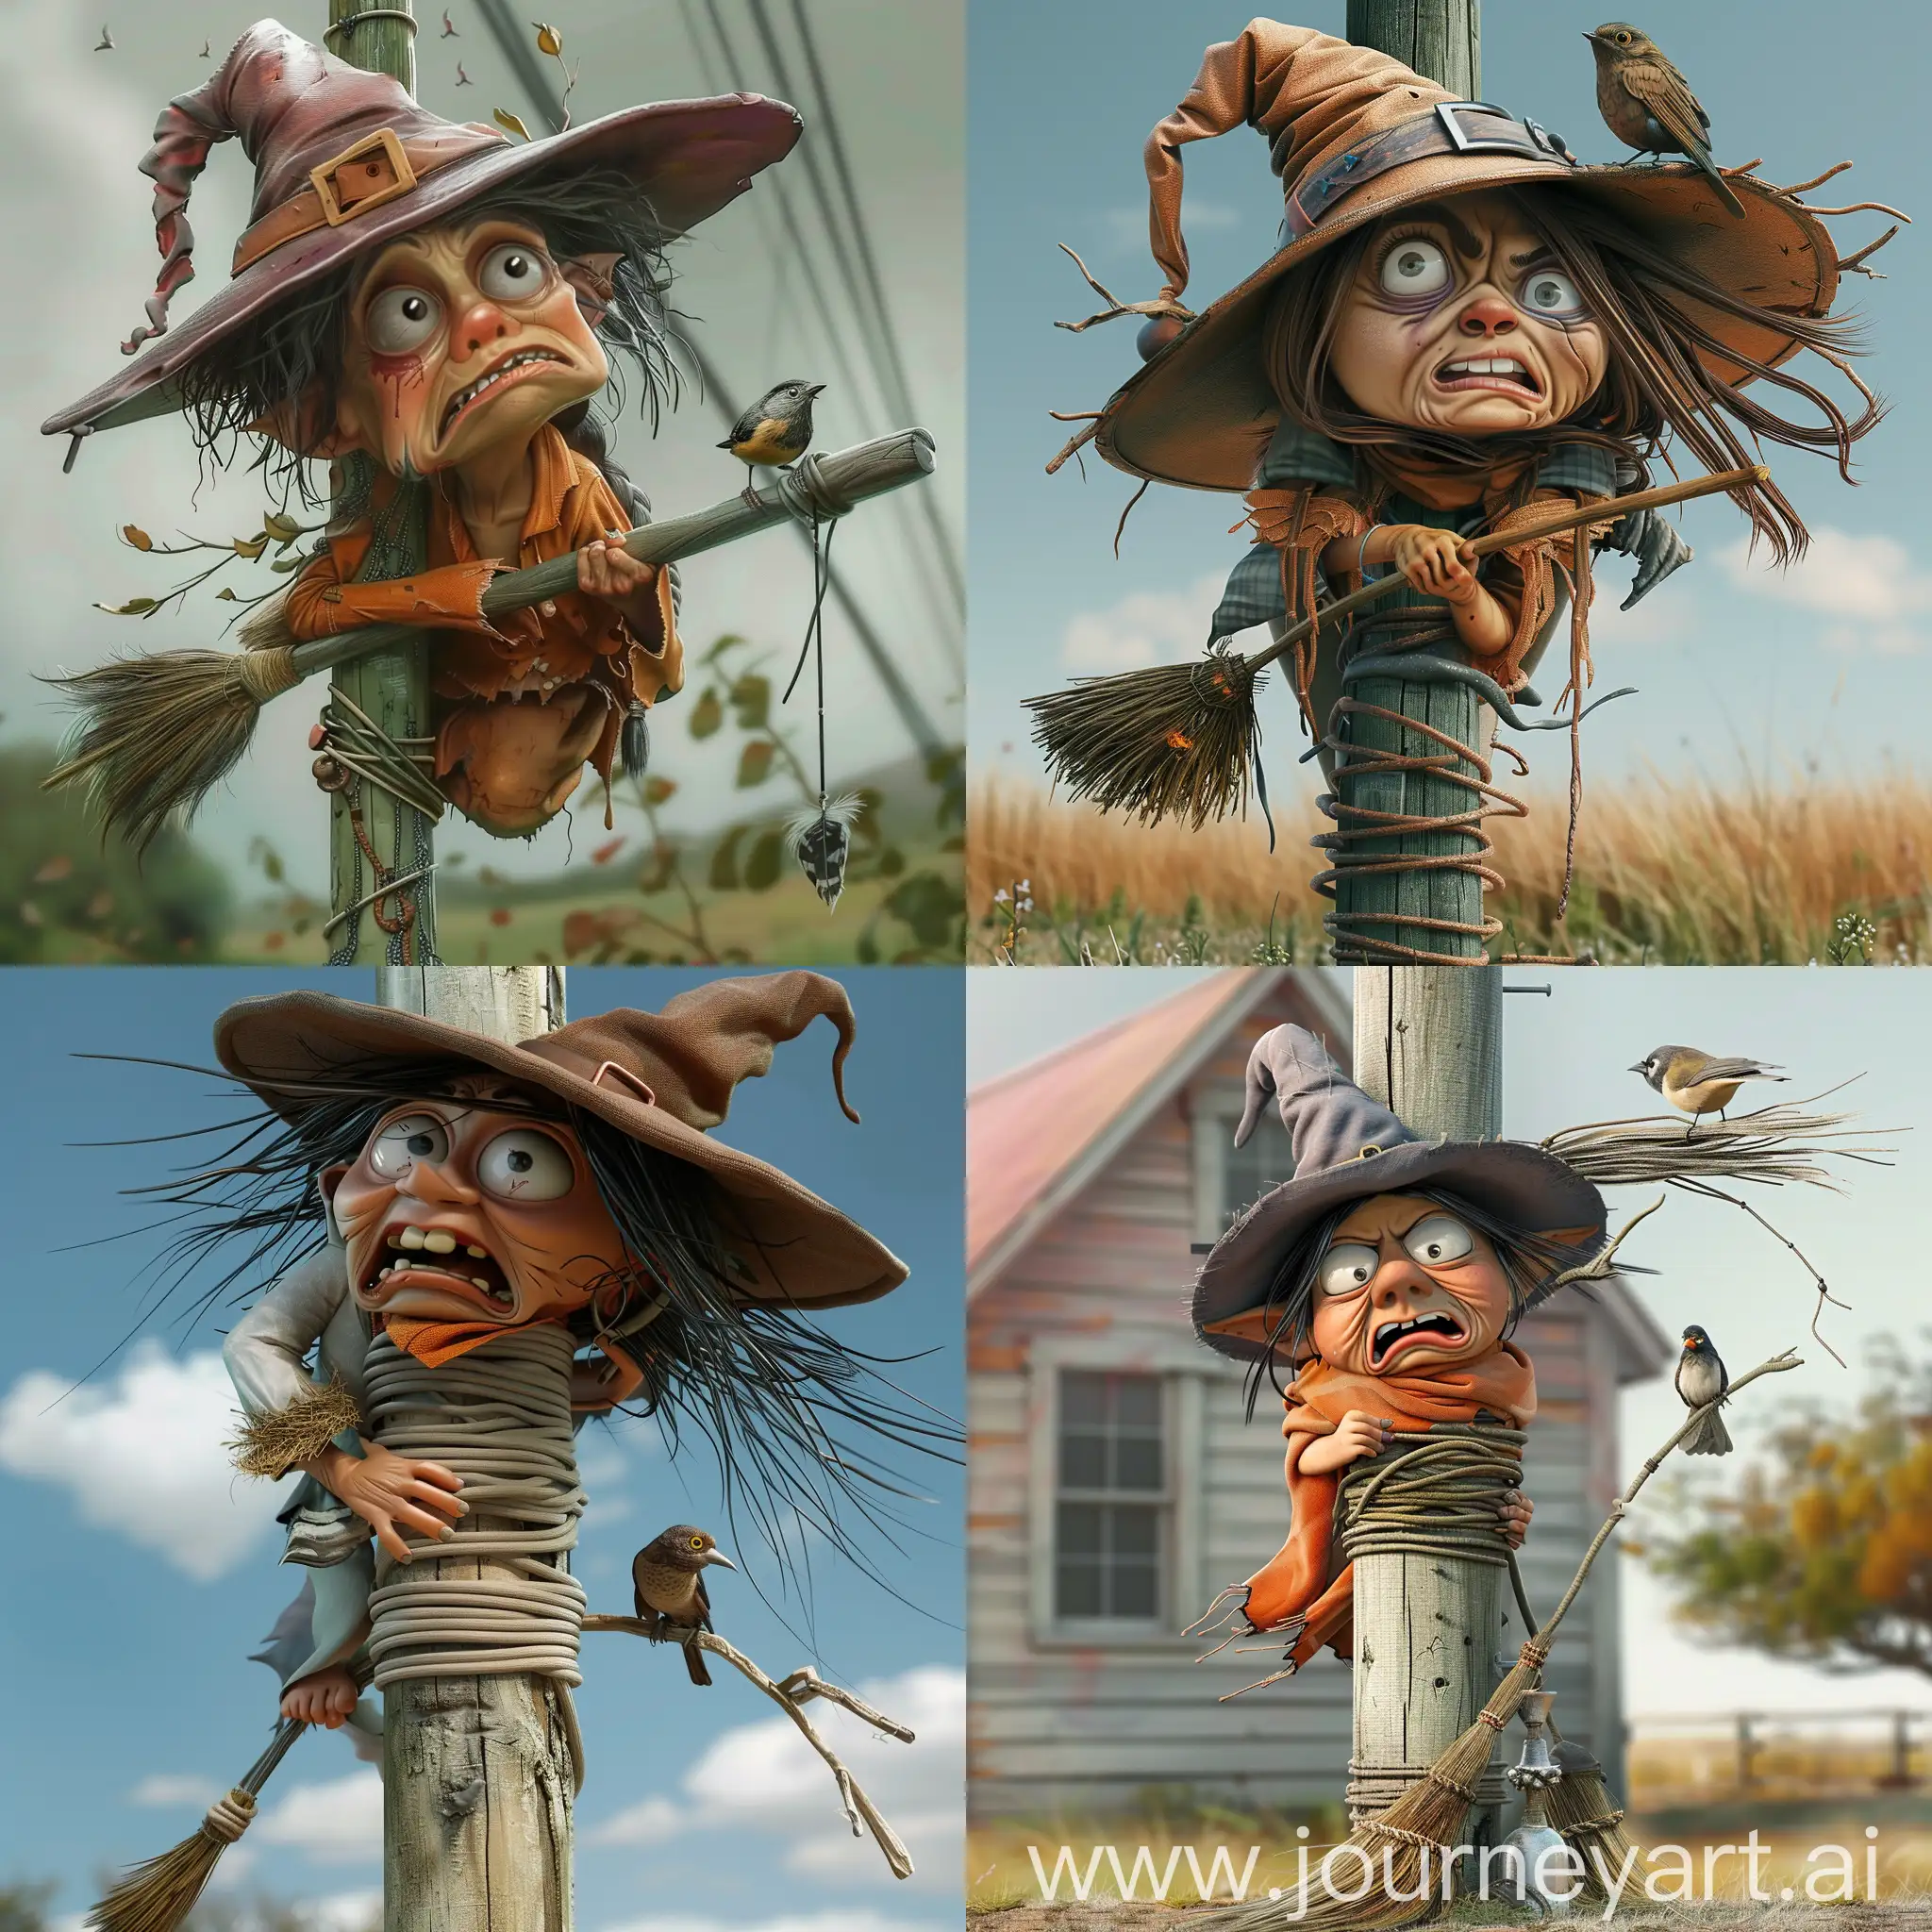 Create an image of  photo realistic image of a funny, goofy caricature of a distressed looking witch on a broom who crashed into a telephone pole and wrapped around it in a comical fashion. A curious bird is perched on the brim of her hat and looking at her.